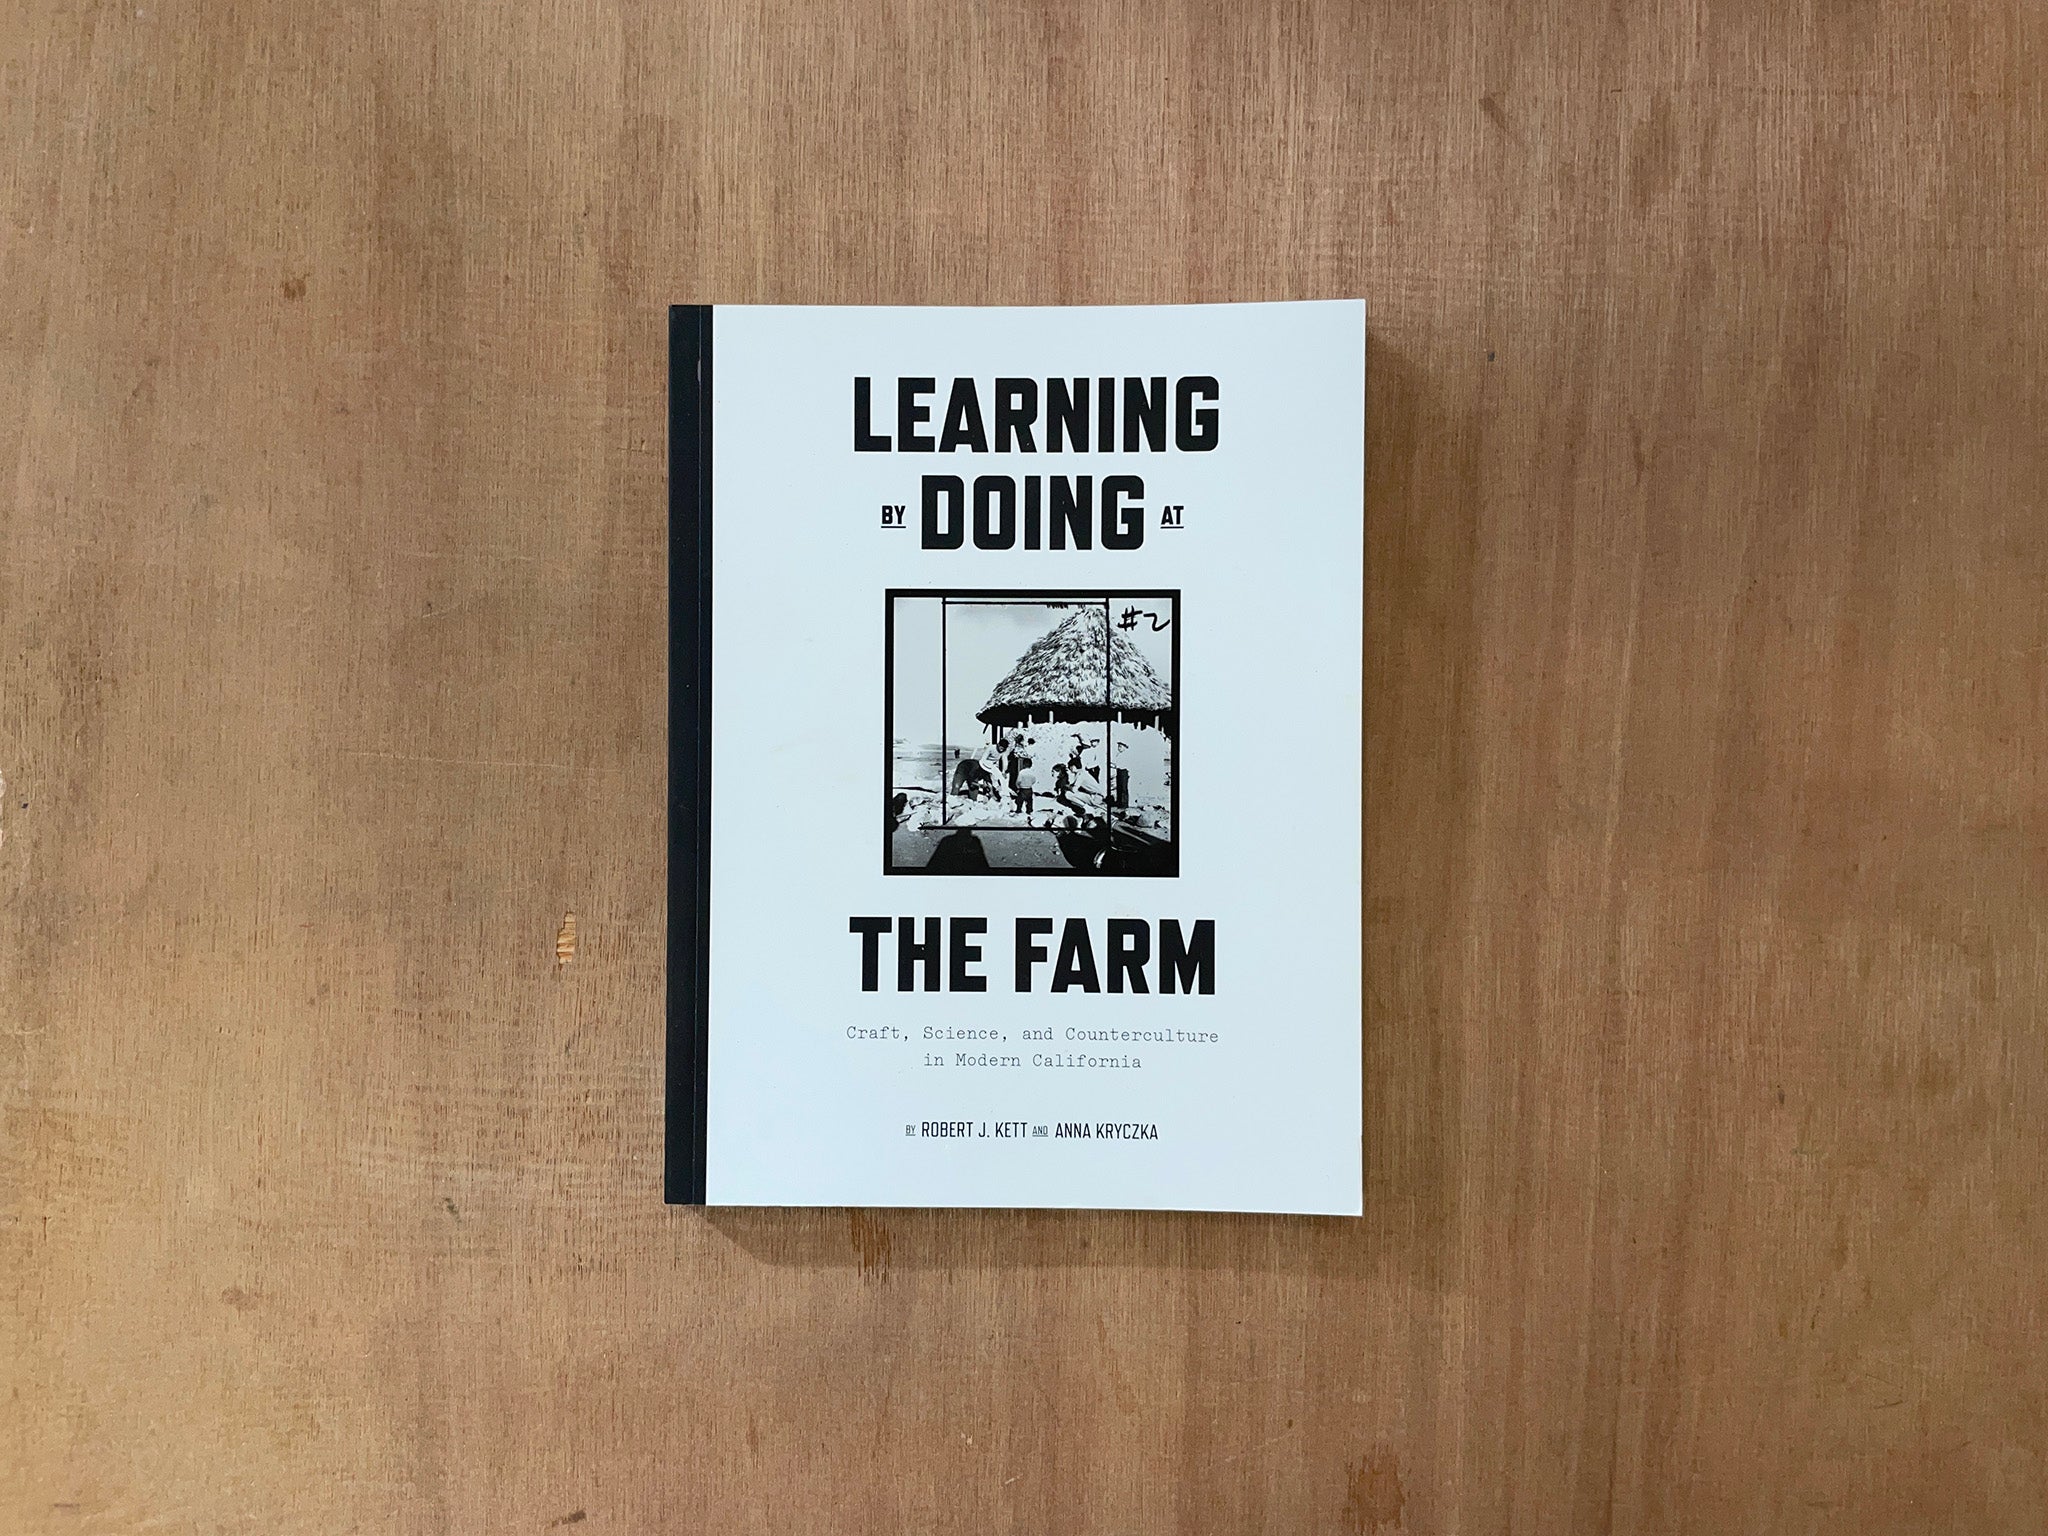 LEARNING BY DOING AT THE FARM: CRAFT, SCIENCE, AND COUNTERCULTURE IN MODERN CALIFORNIA Ed. by Robert J. Kett and Anna Kryczka